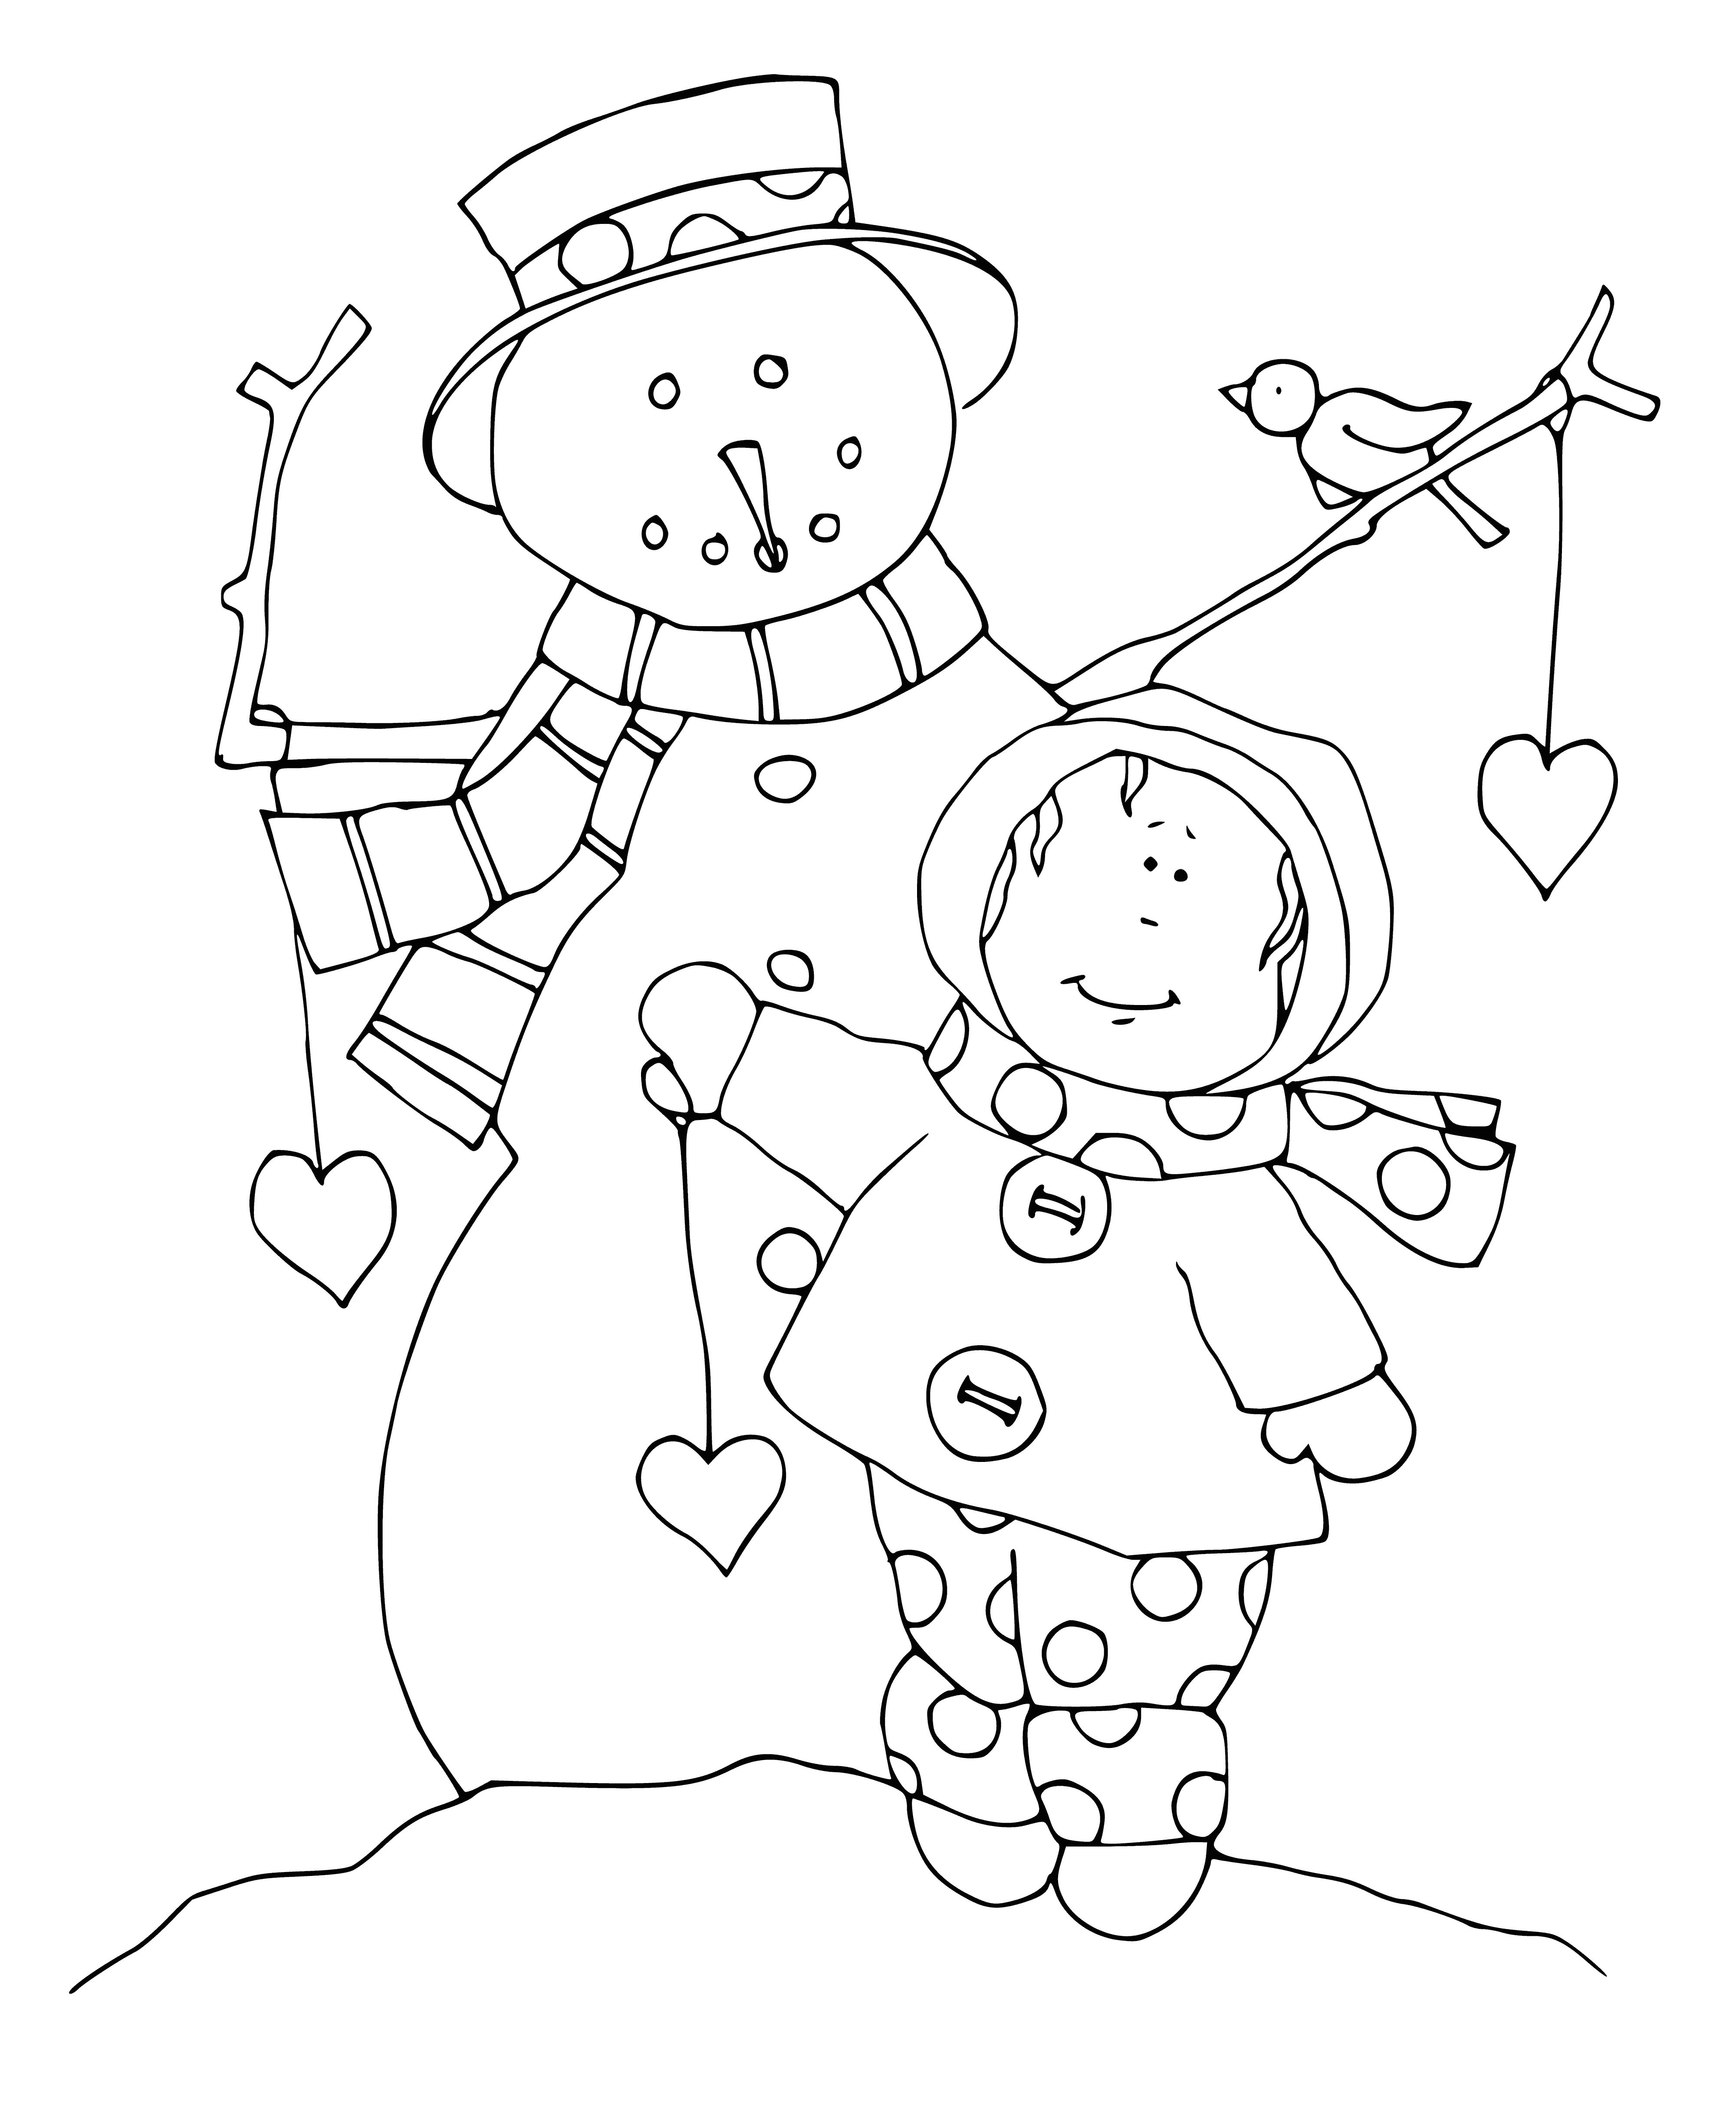 coloring page: Girl & snowman in center of page: girl wears pink, blond hair & holds broom. Snowman wears green scarf & brown hat, has carrot nose & coal eyes/mouth.